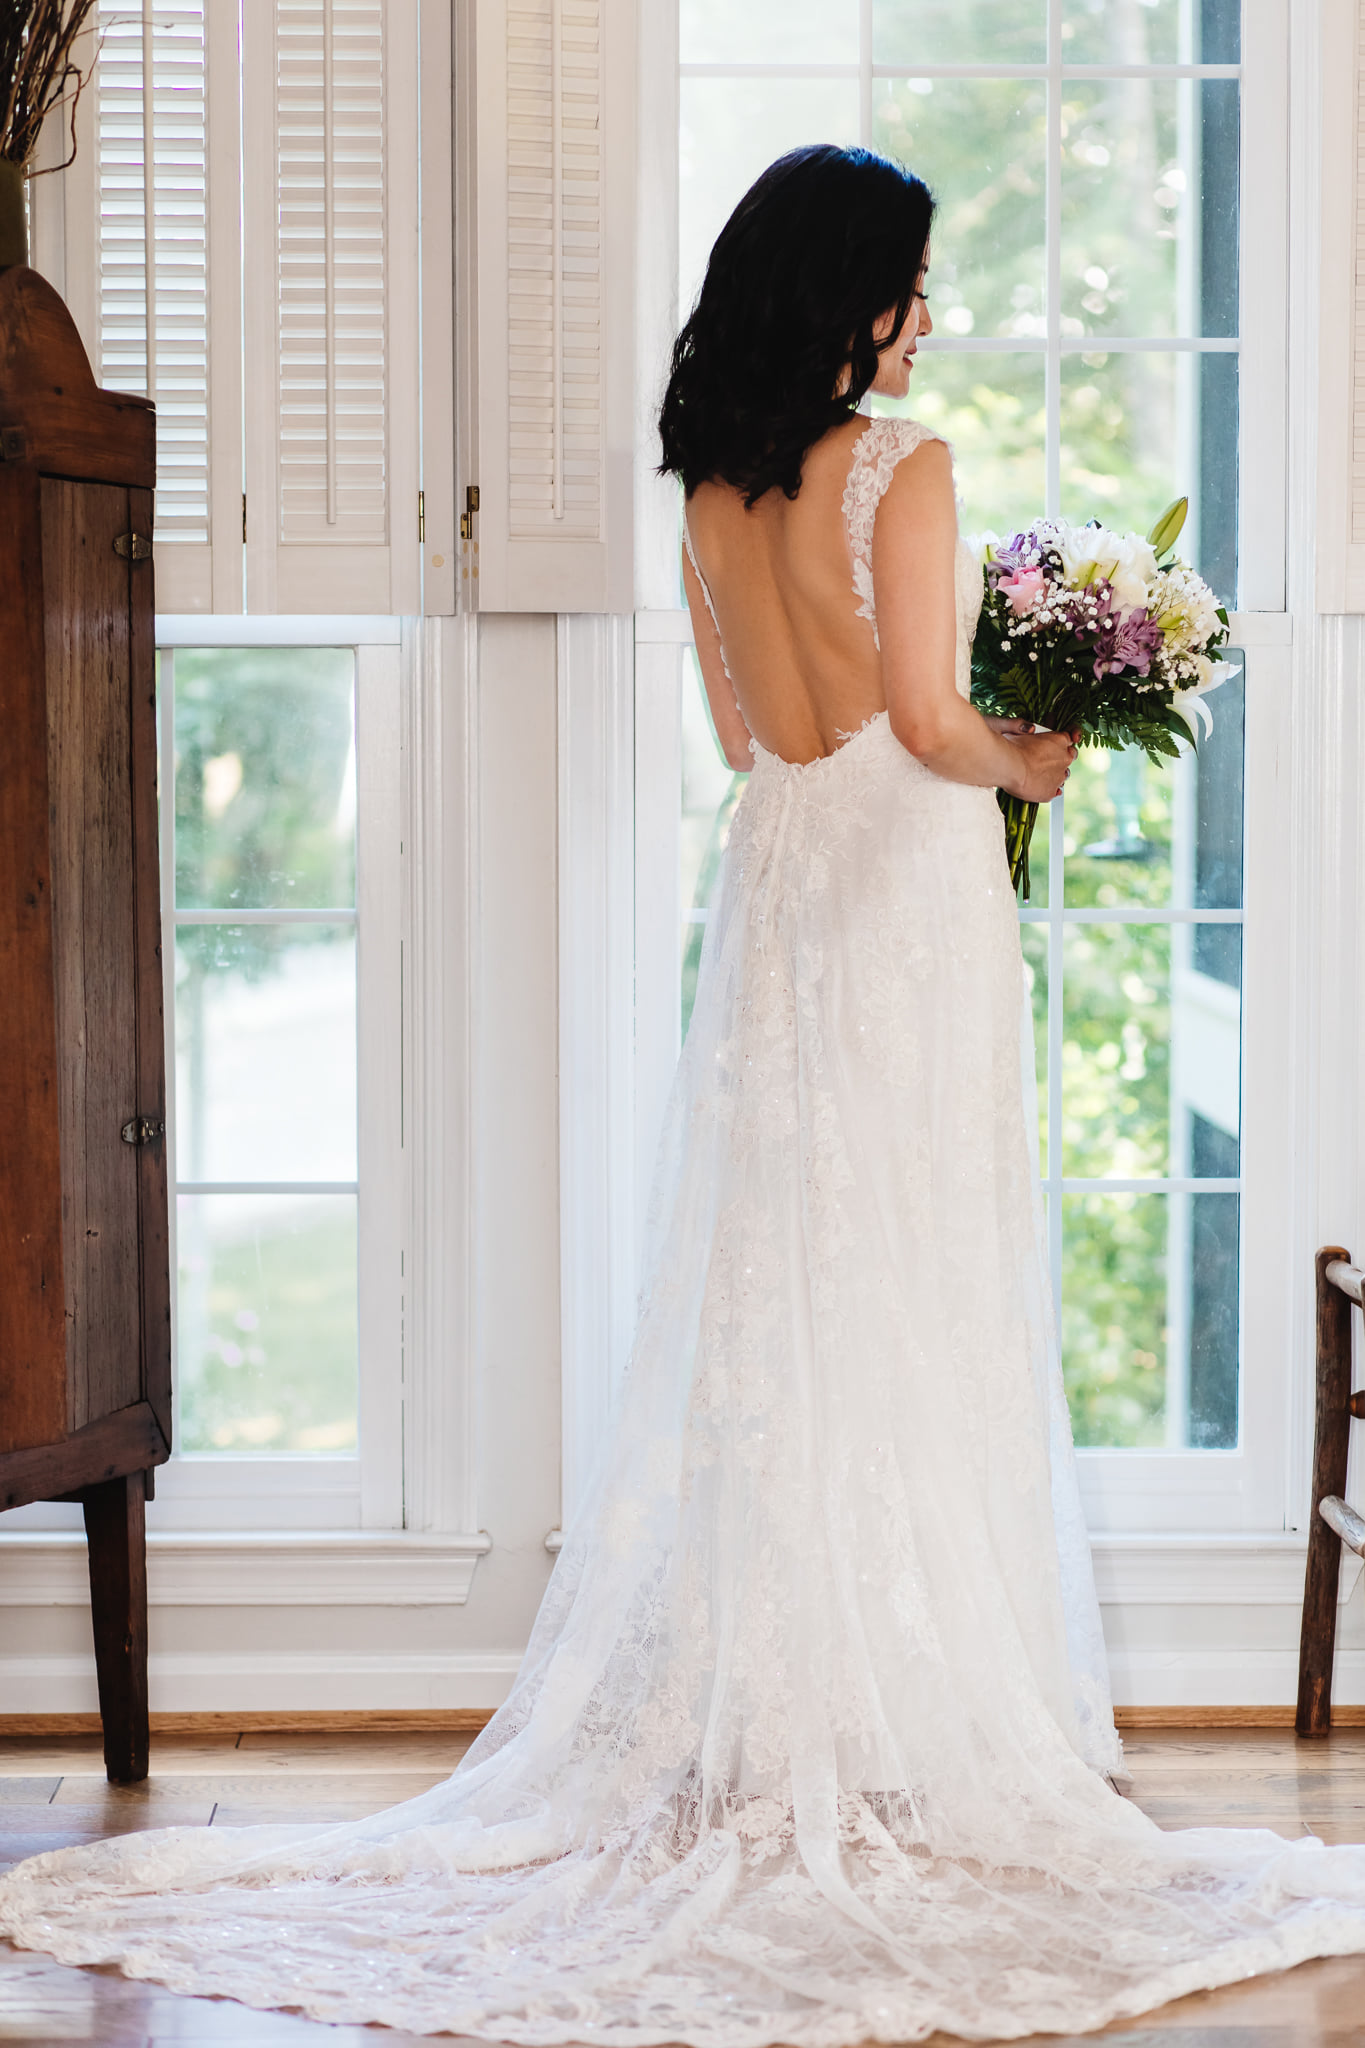 Bride posing in front of the window.